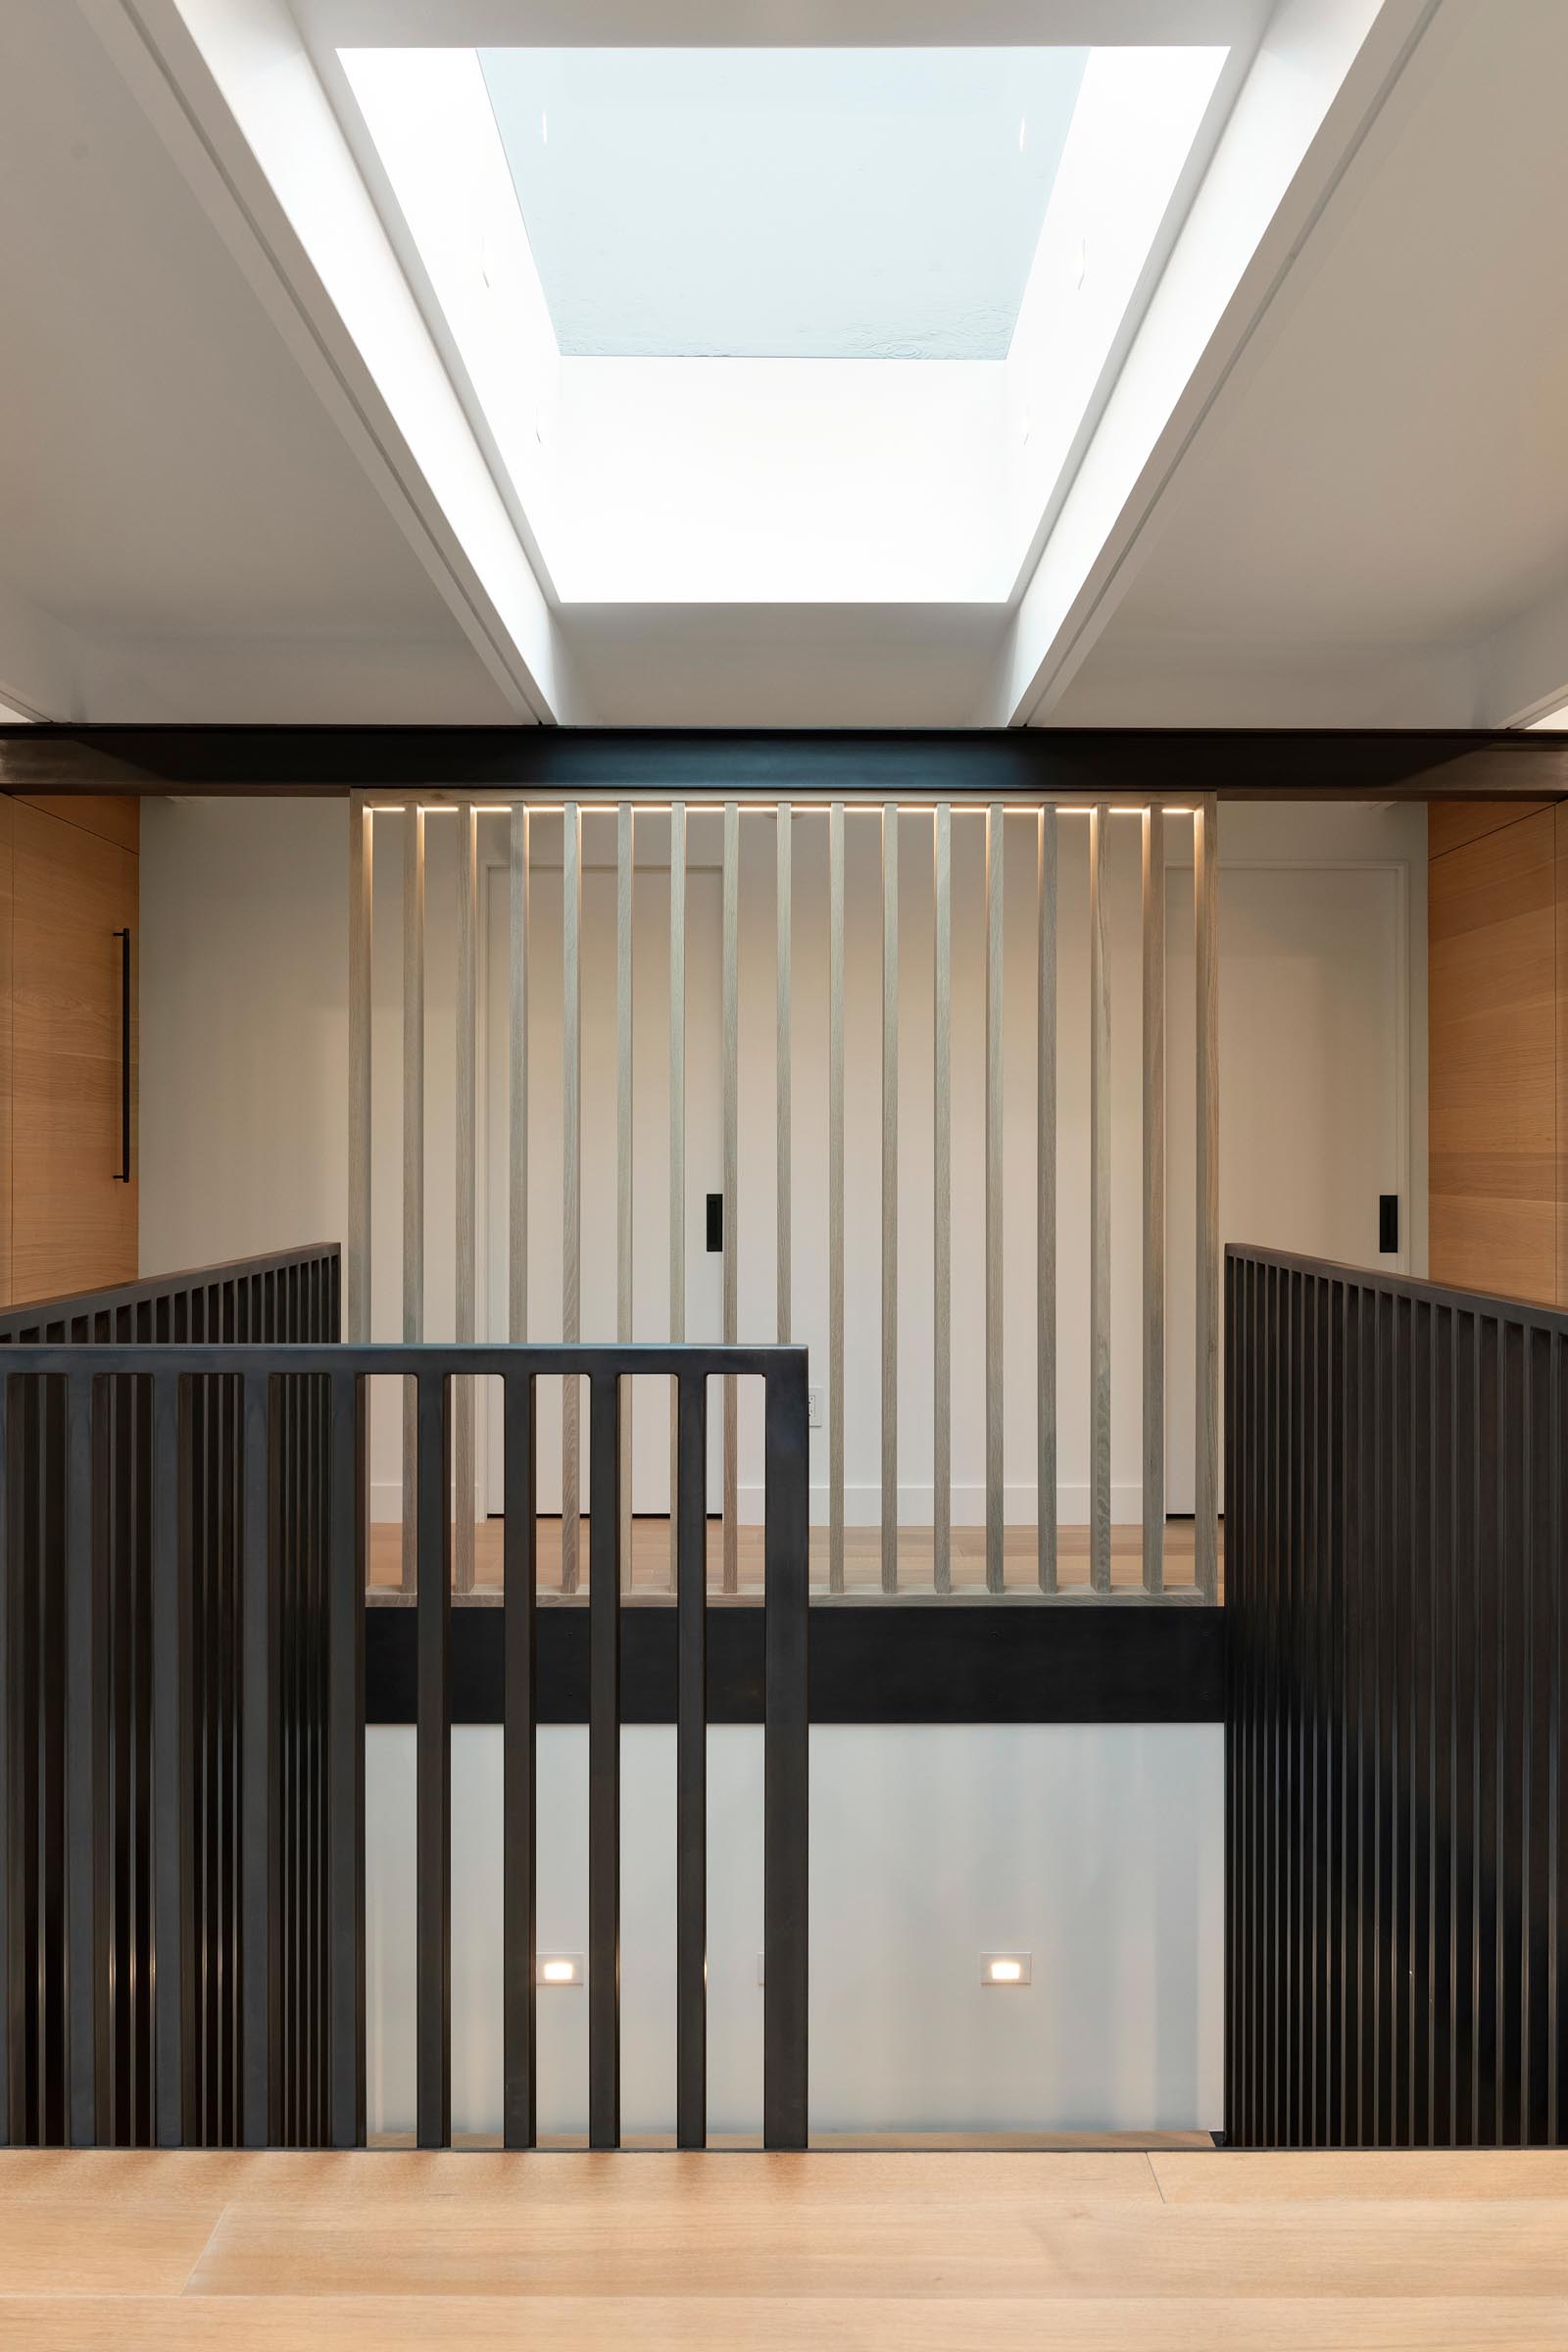 A skylight by the front door filters natural light through to the staircase that leads to the lower level of the home and features black handrails.